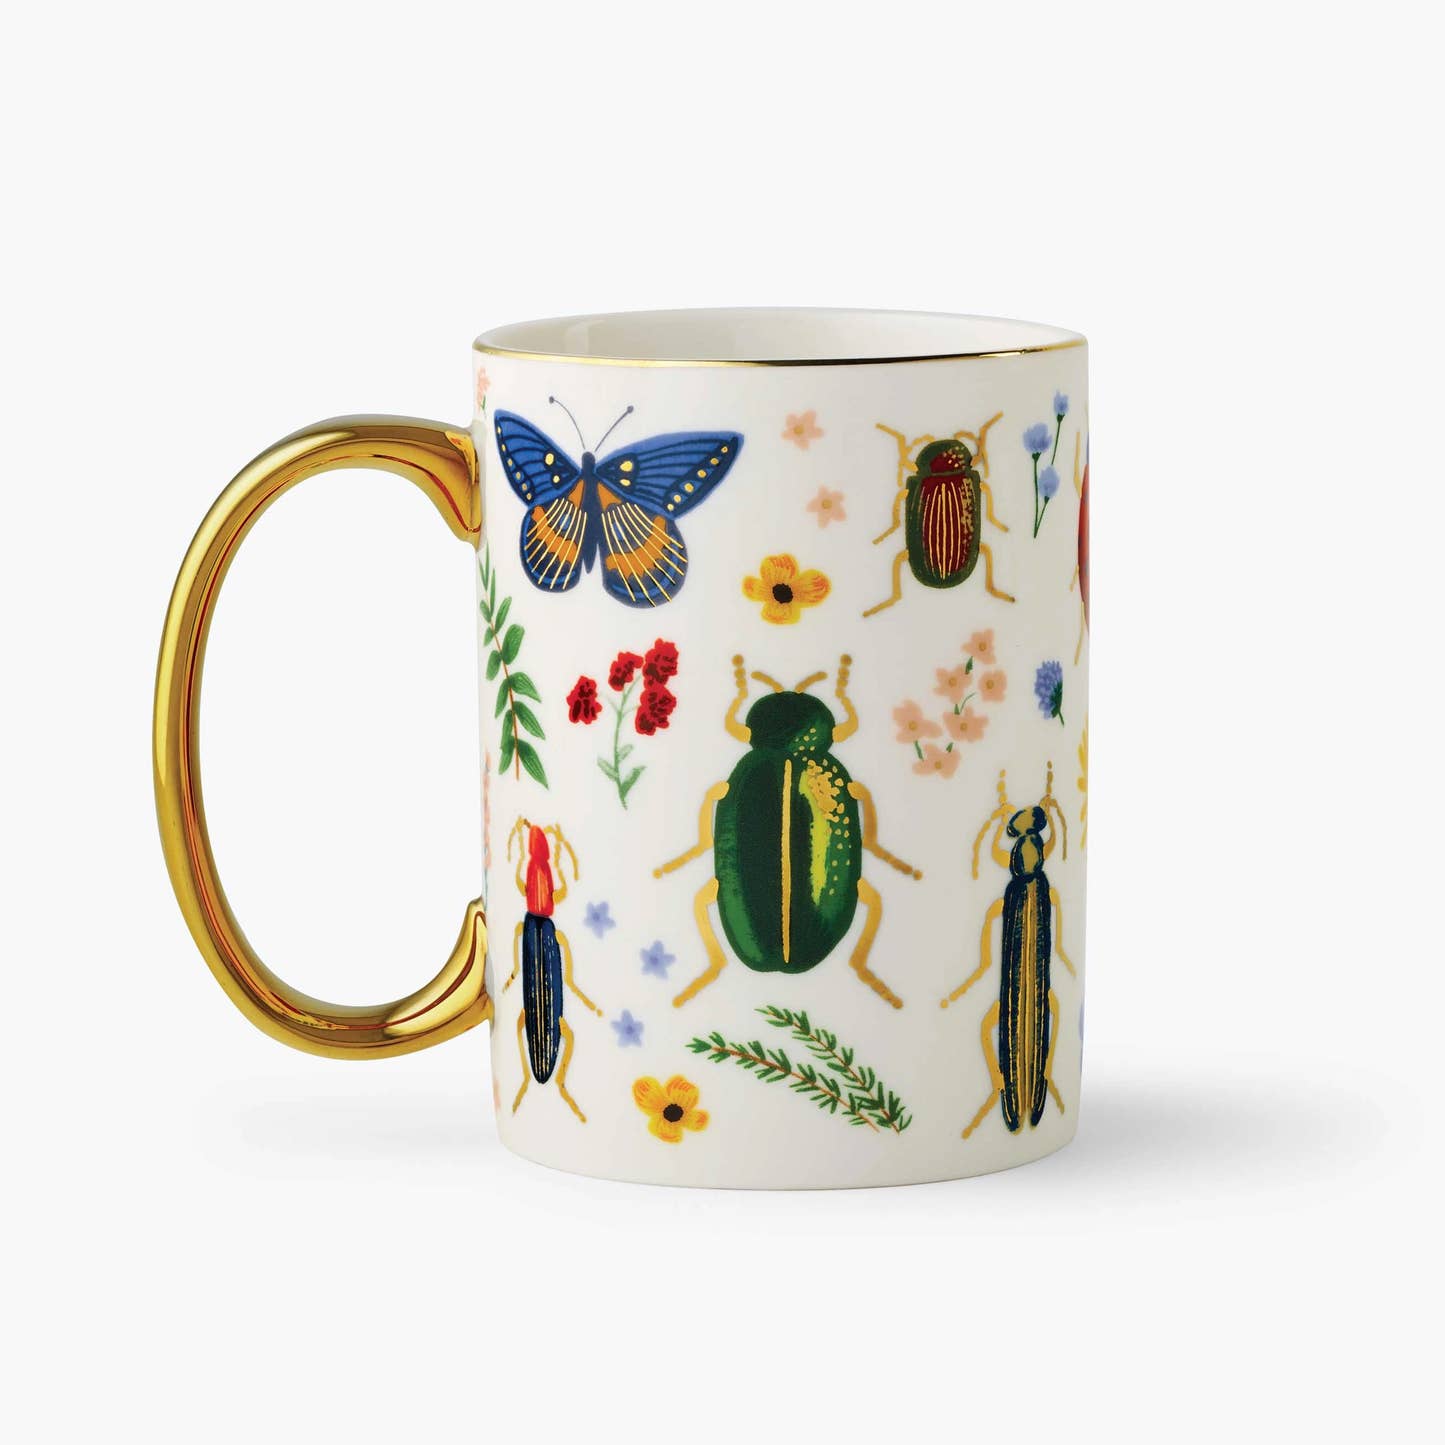 Rifle Paper Co Curio Porcelain Mug illustrated with flowers, insects, and gold accents